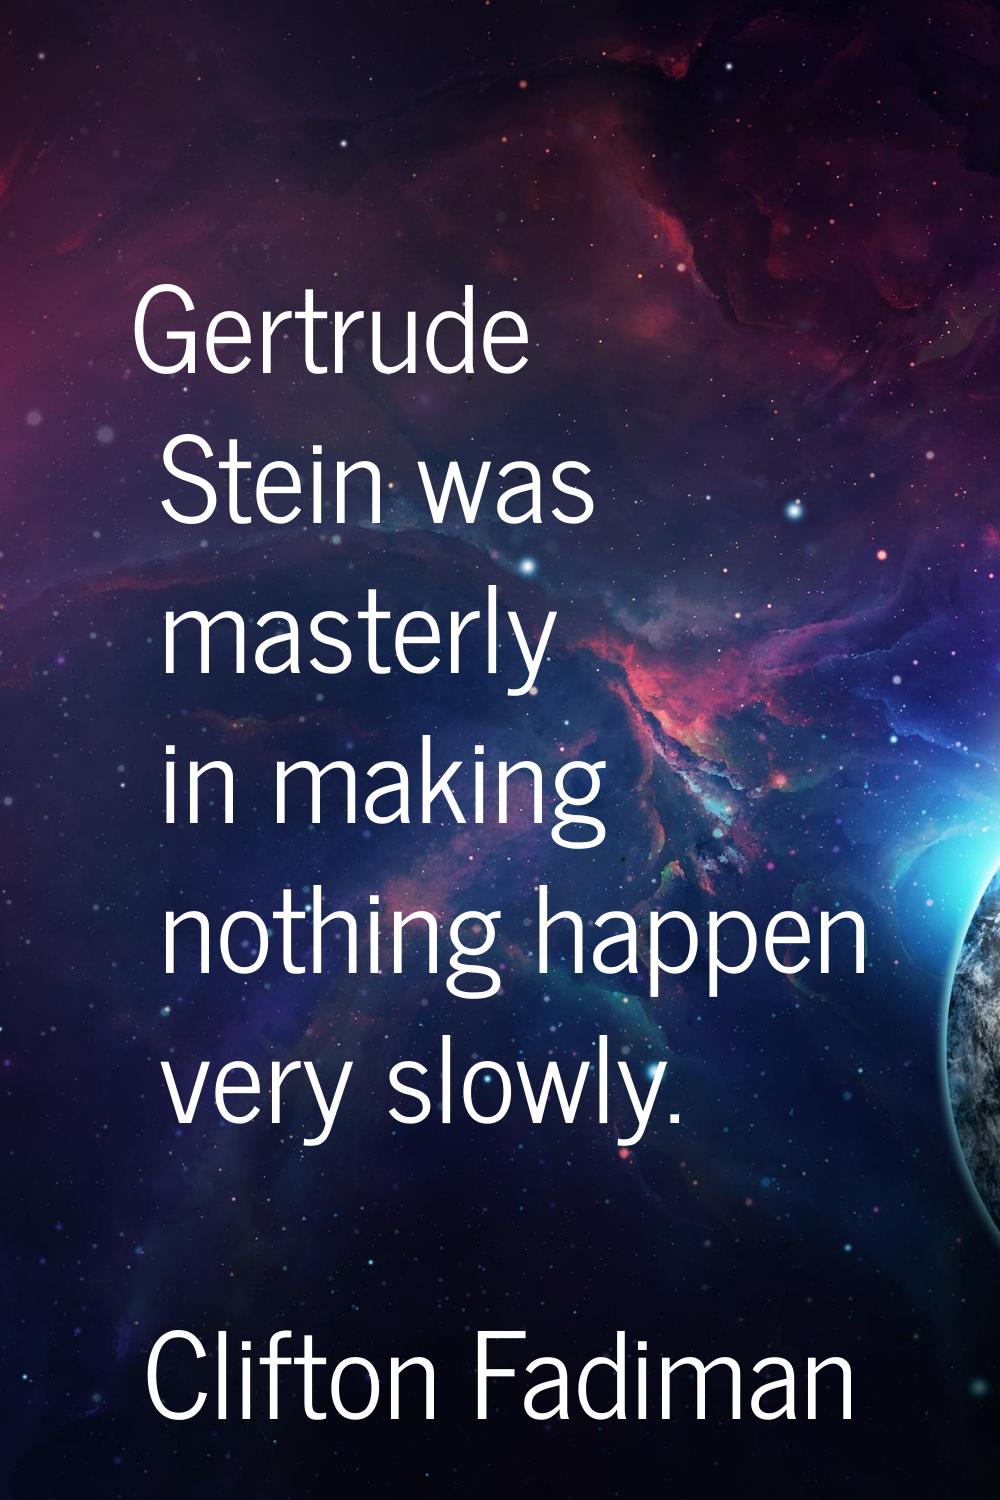 Gertrude Stein was masterly in making nothing happen very slowly.